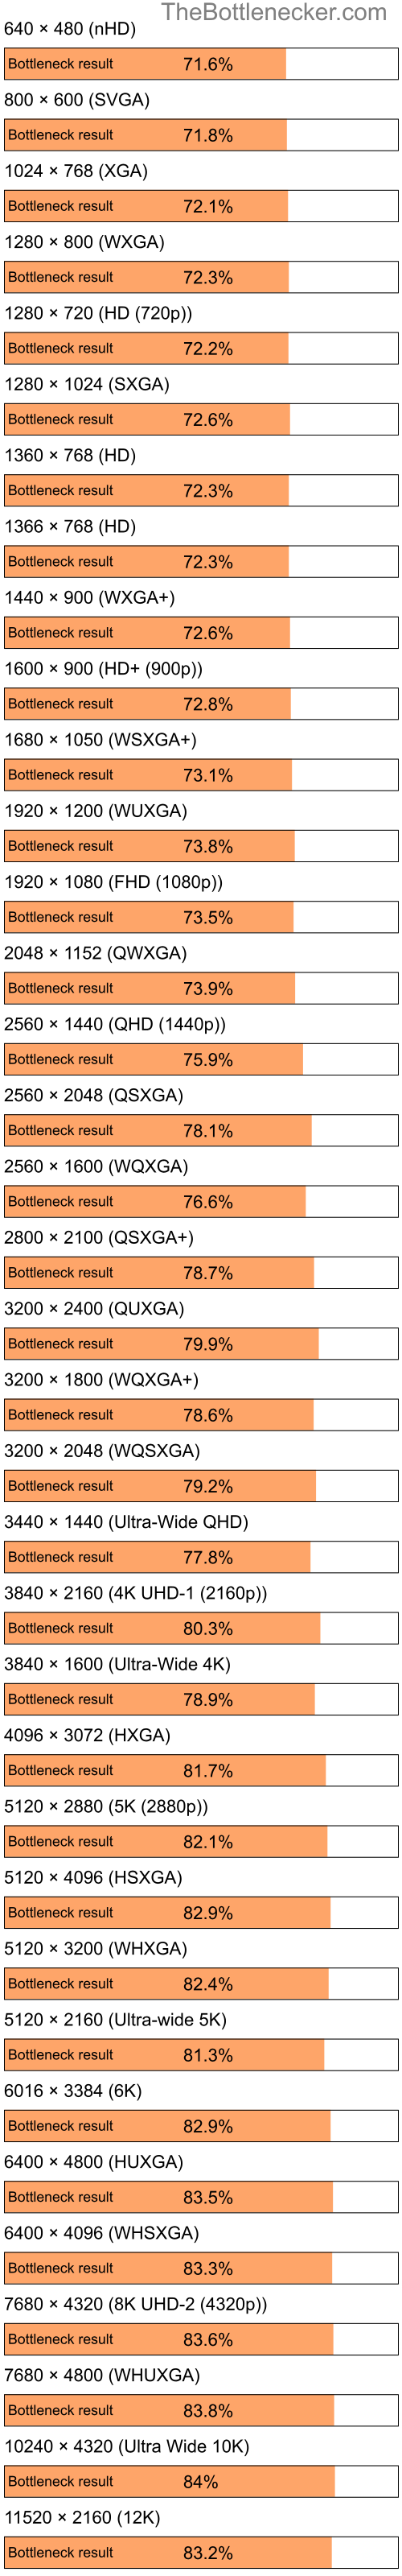 Bottleneck results by resolution for Intel Celeron and NVIDIA Quadro NVS 135M in General Tasks